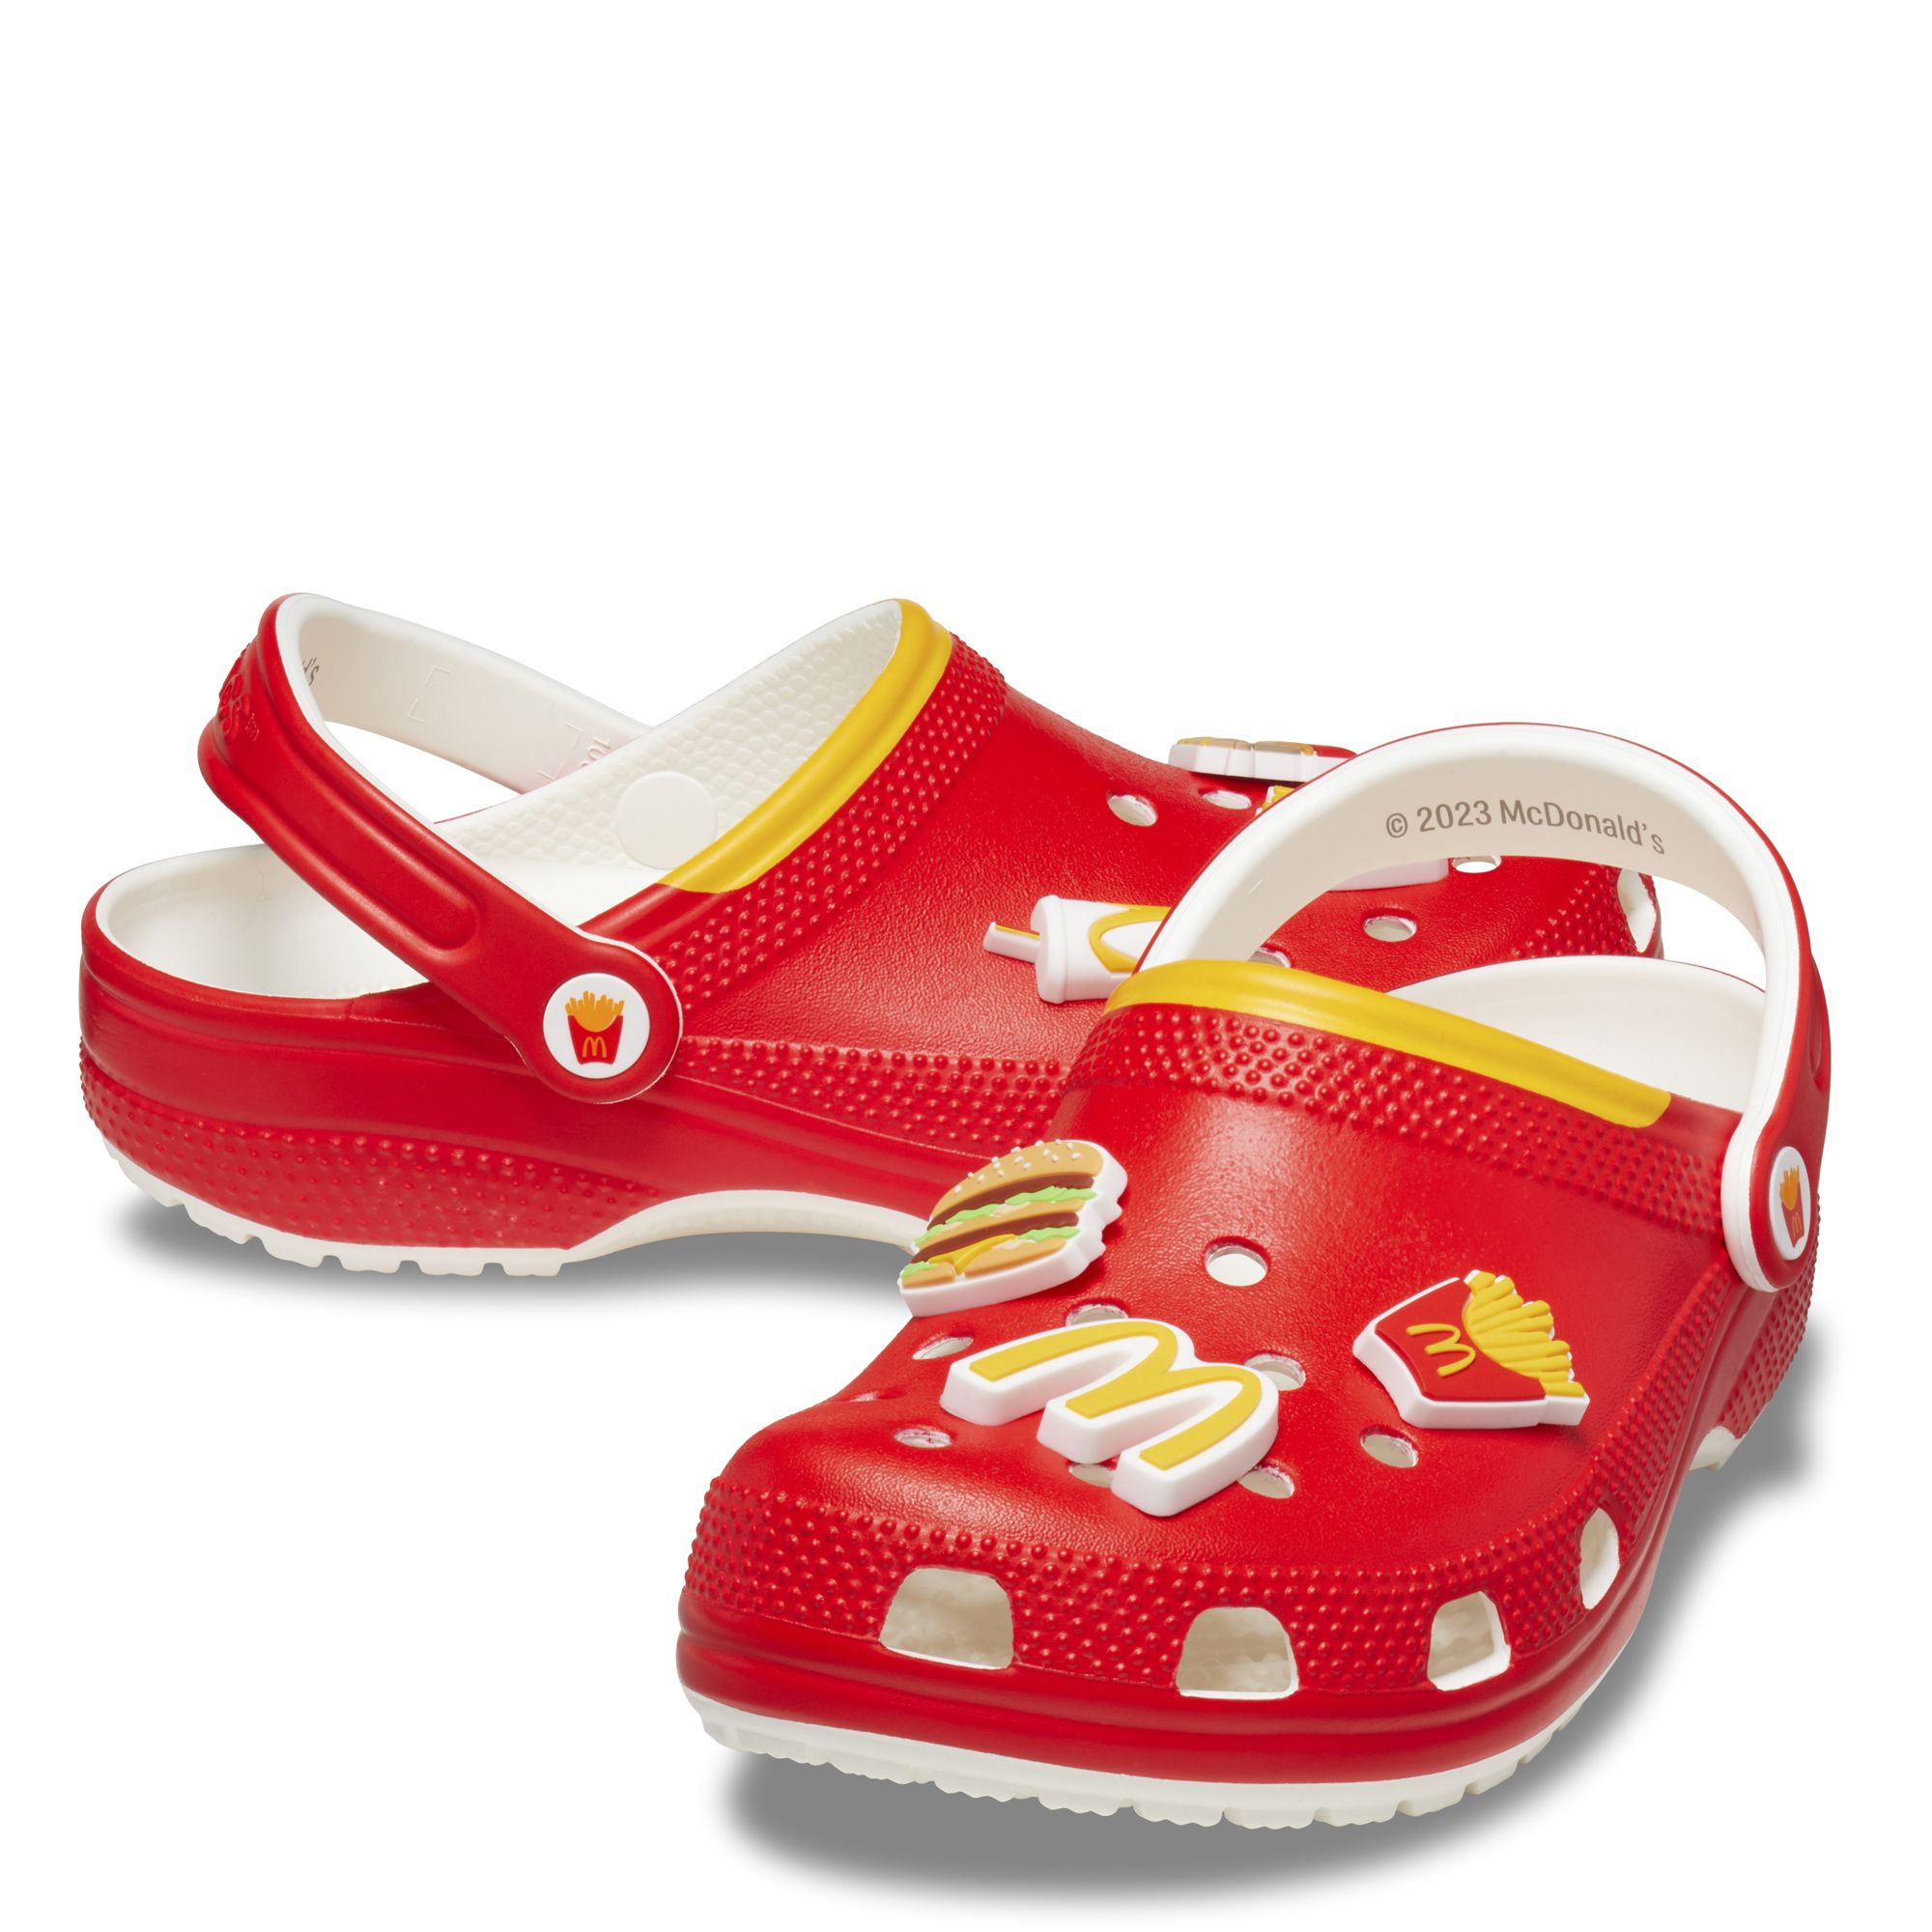 Crocs Classic Clog Lightning McQueen *IN-HAND* - FAST AND FREE